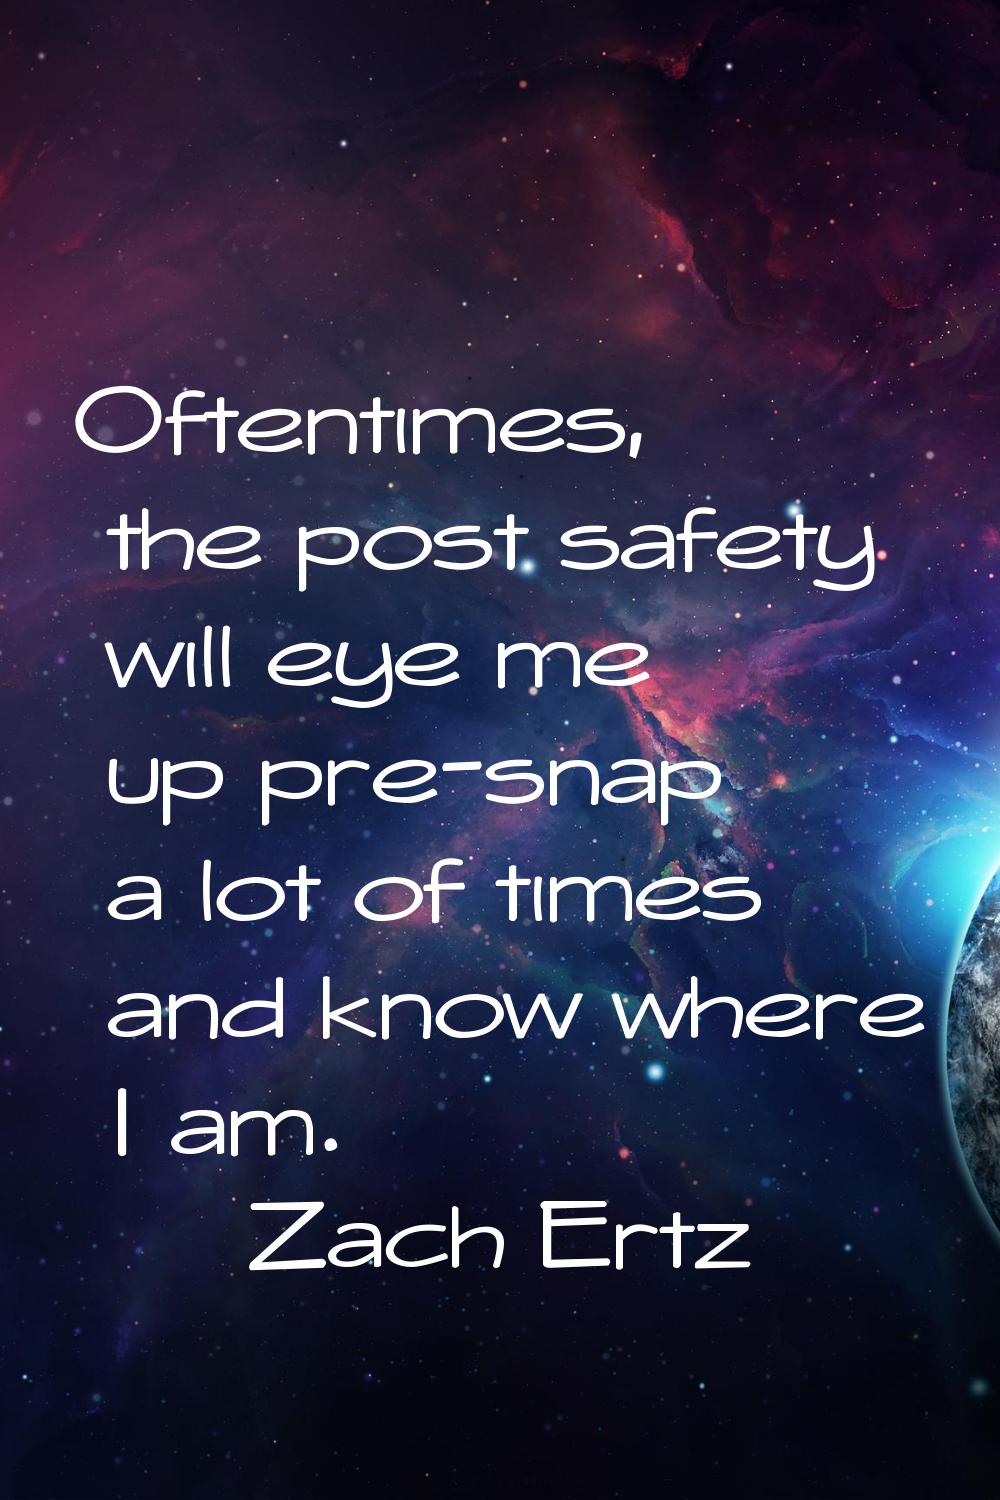 Oftentimes, the post safety will eye me up pre-snap a lot of times and know where I am.